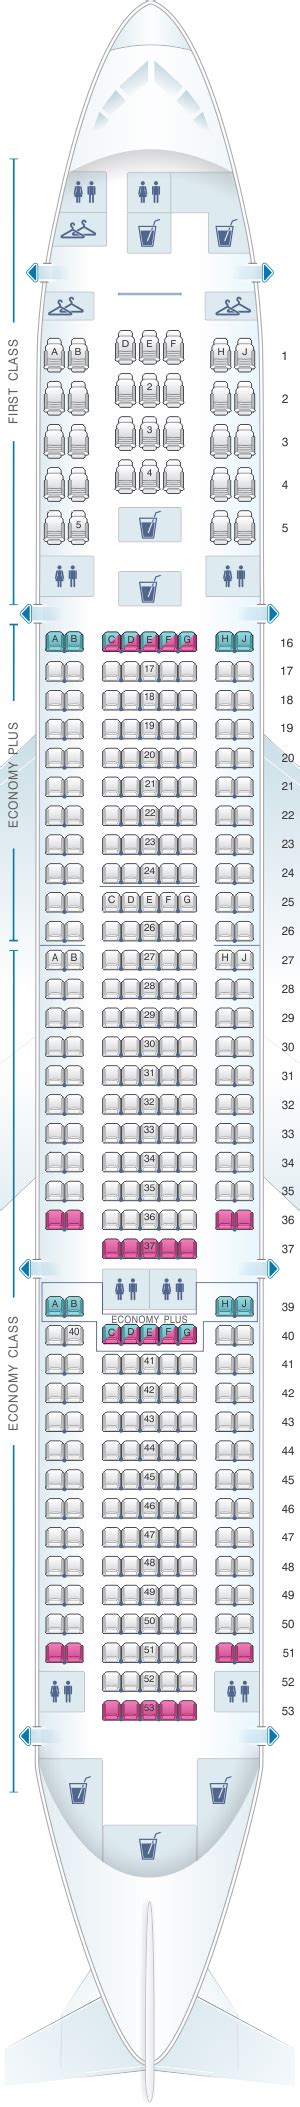 For your next United flight, use this seating